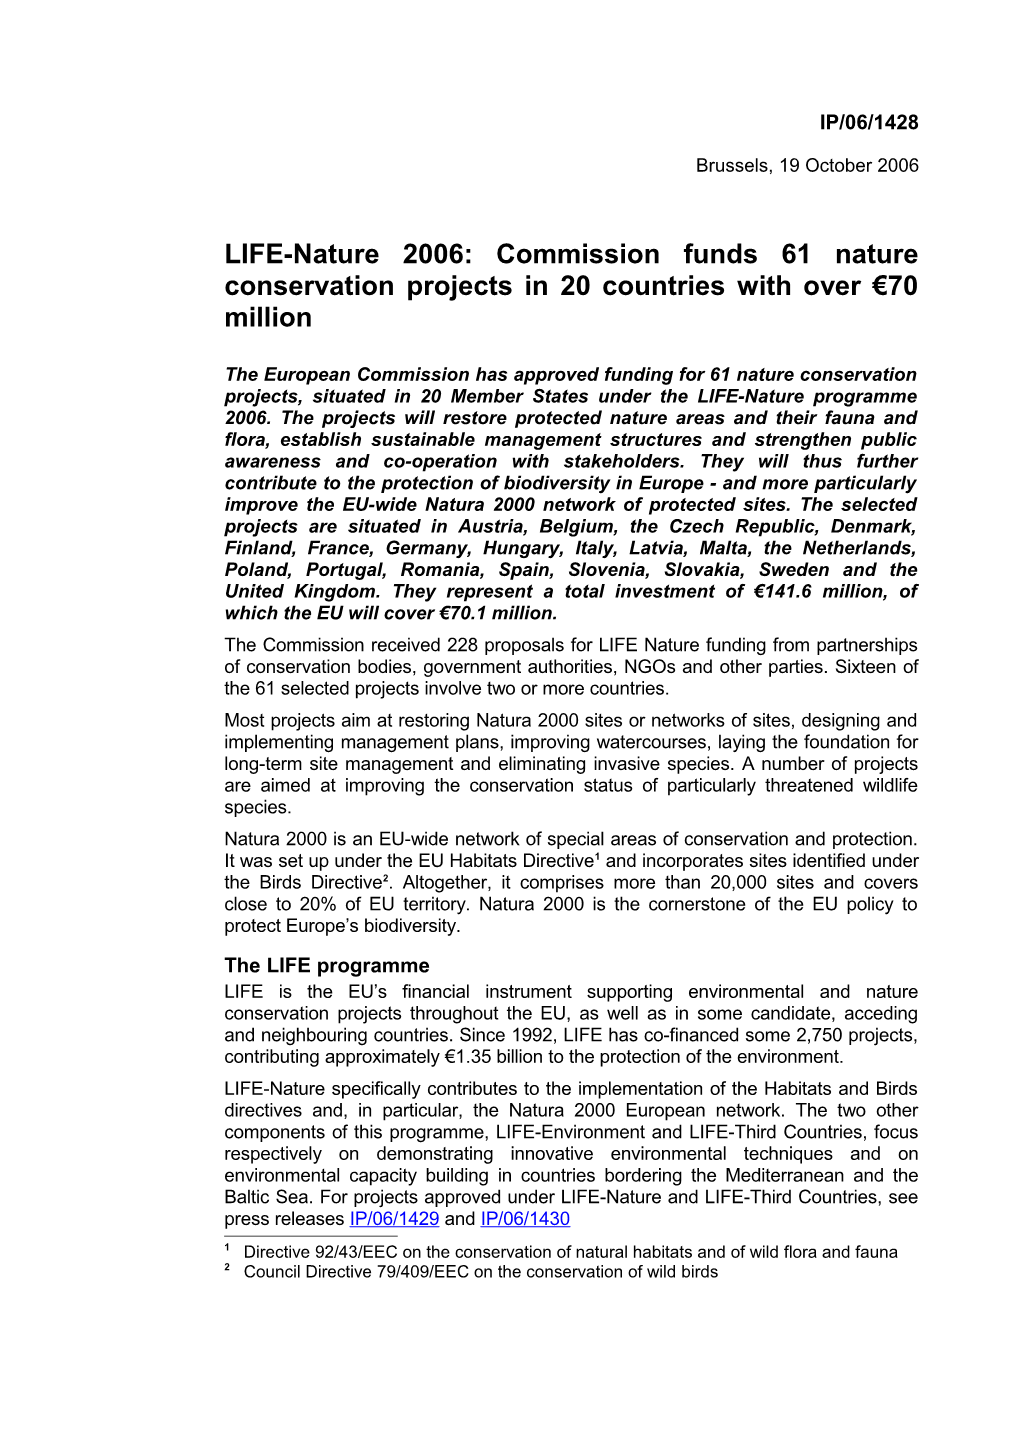 LIFE-Nature 2006: Commission Funds 61 Nature Conservation Projects in 20 Countries With